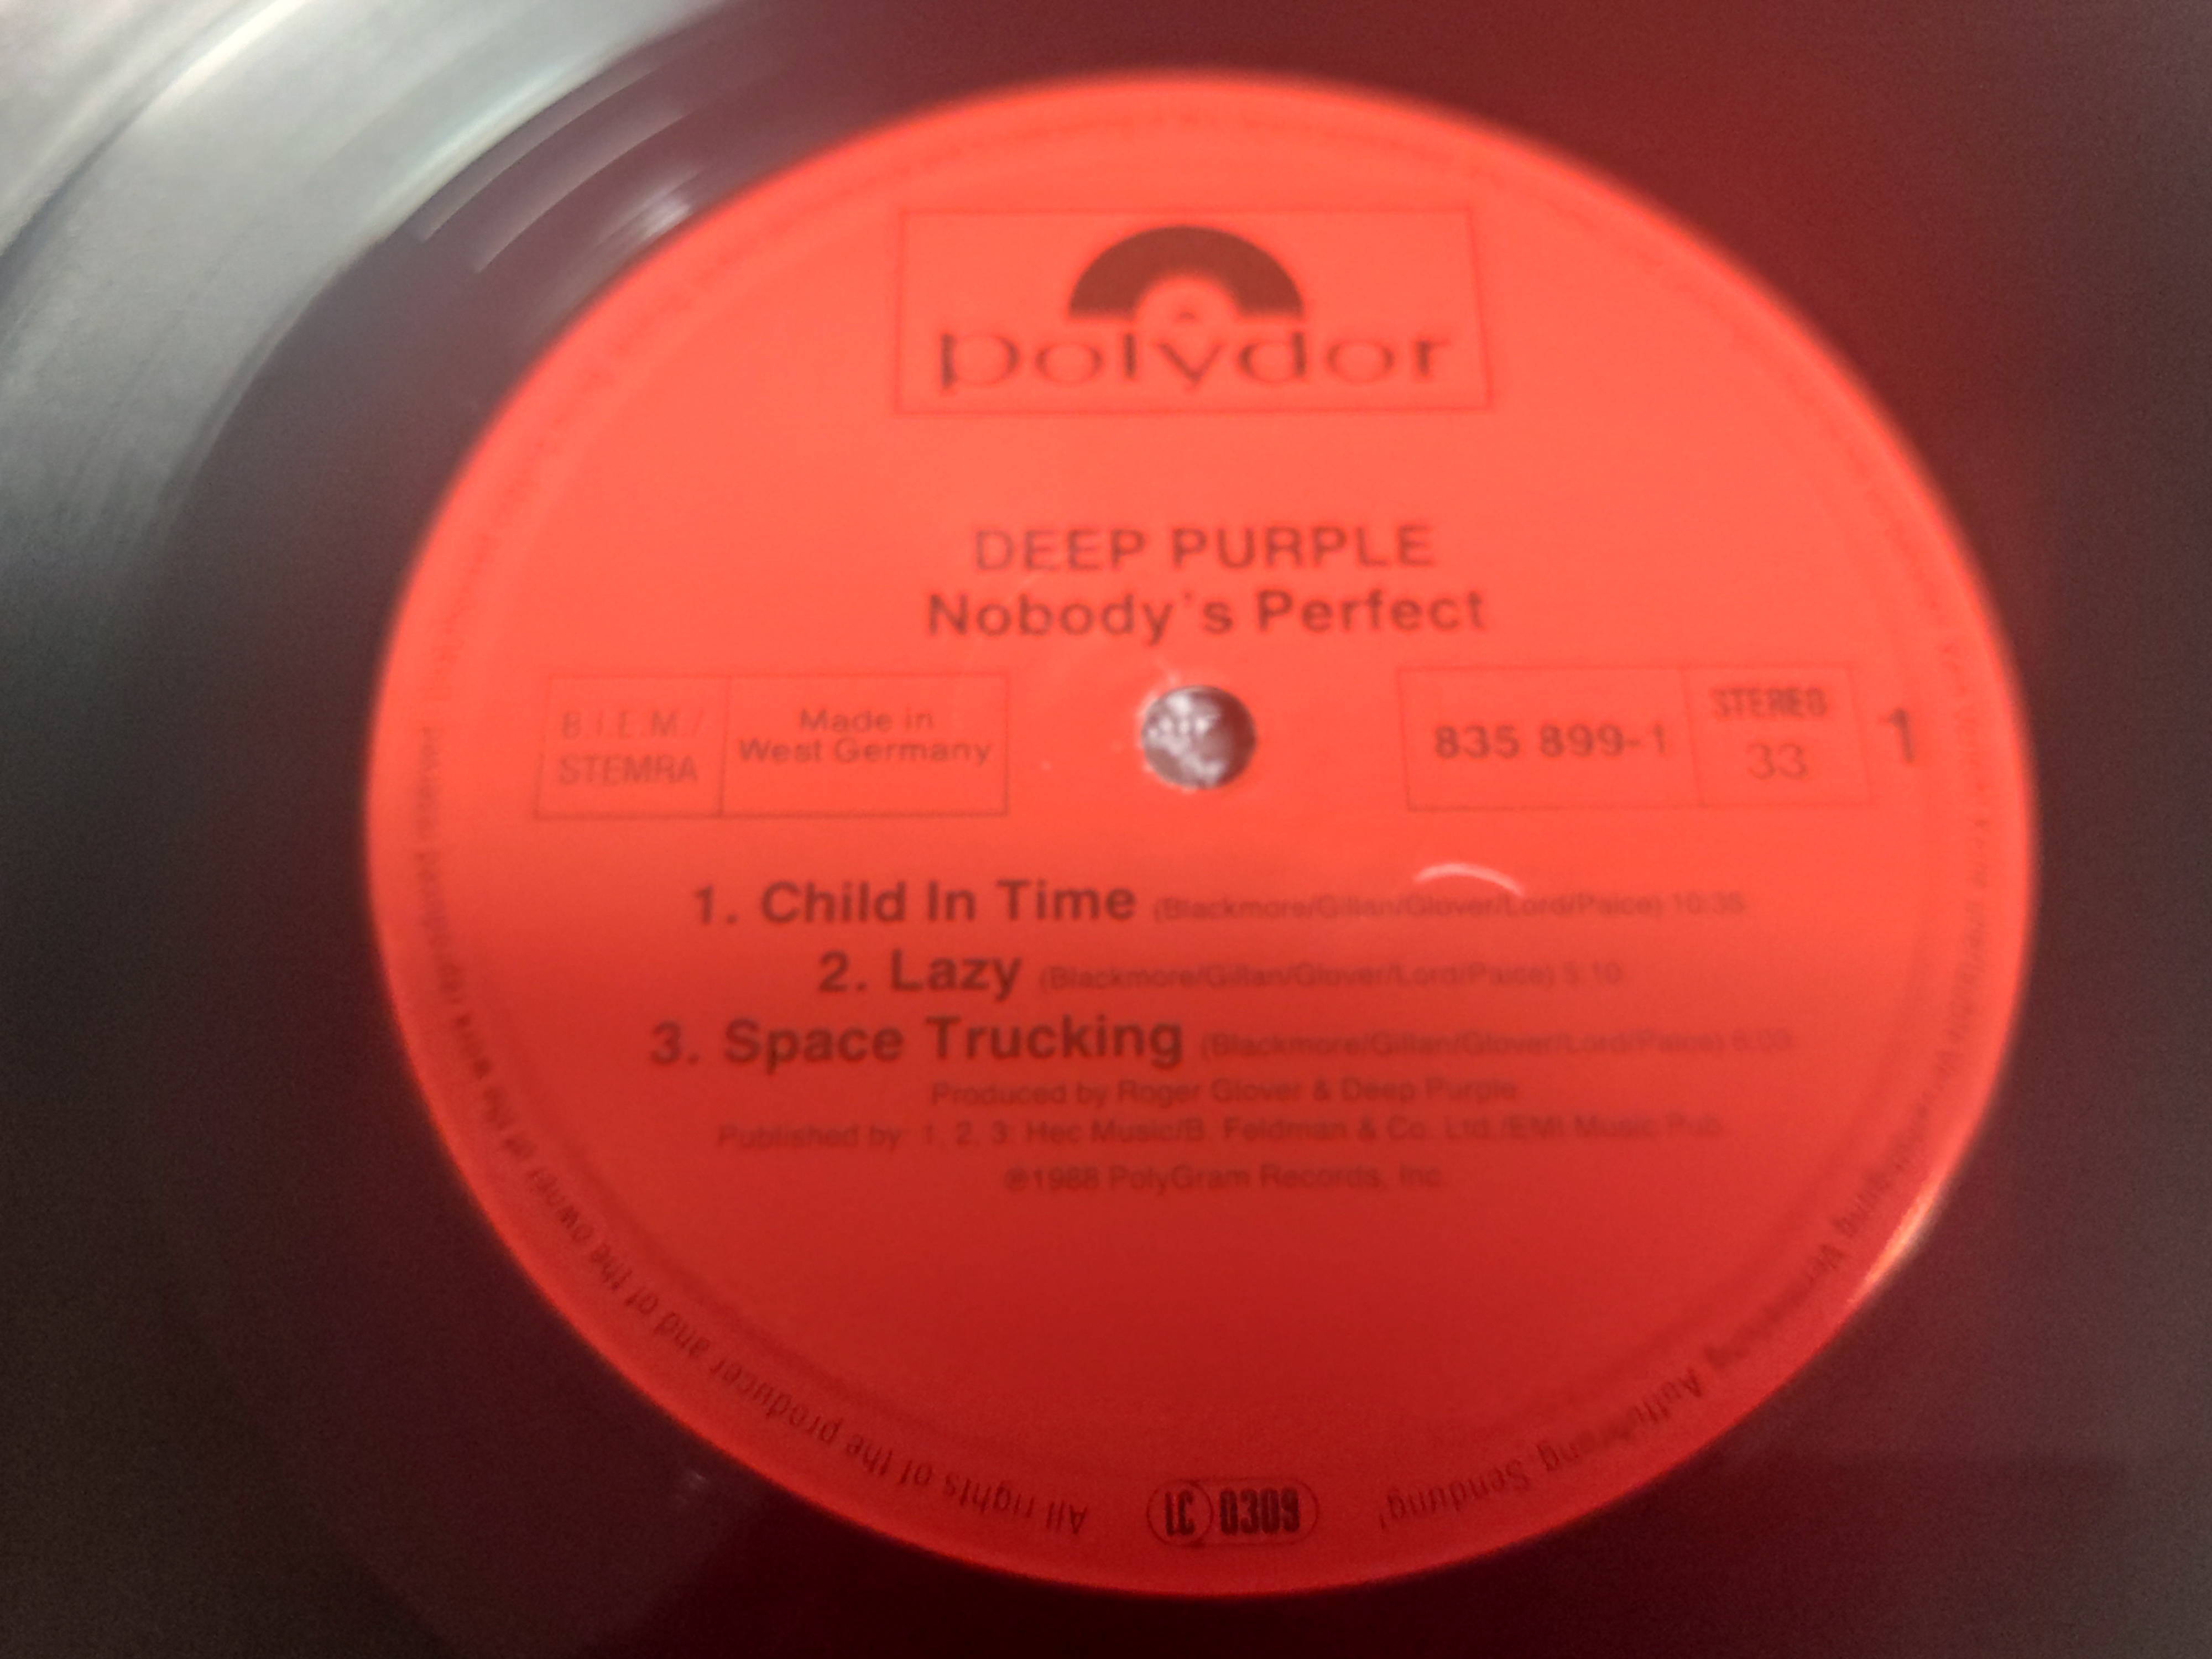 Deep Purple - Nobody's Perfect Double LP - Europe 1988 First Pressing. Ex To NM Condition. - Image 7 of 7